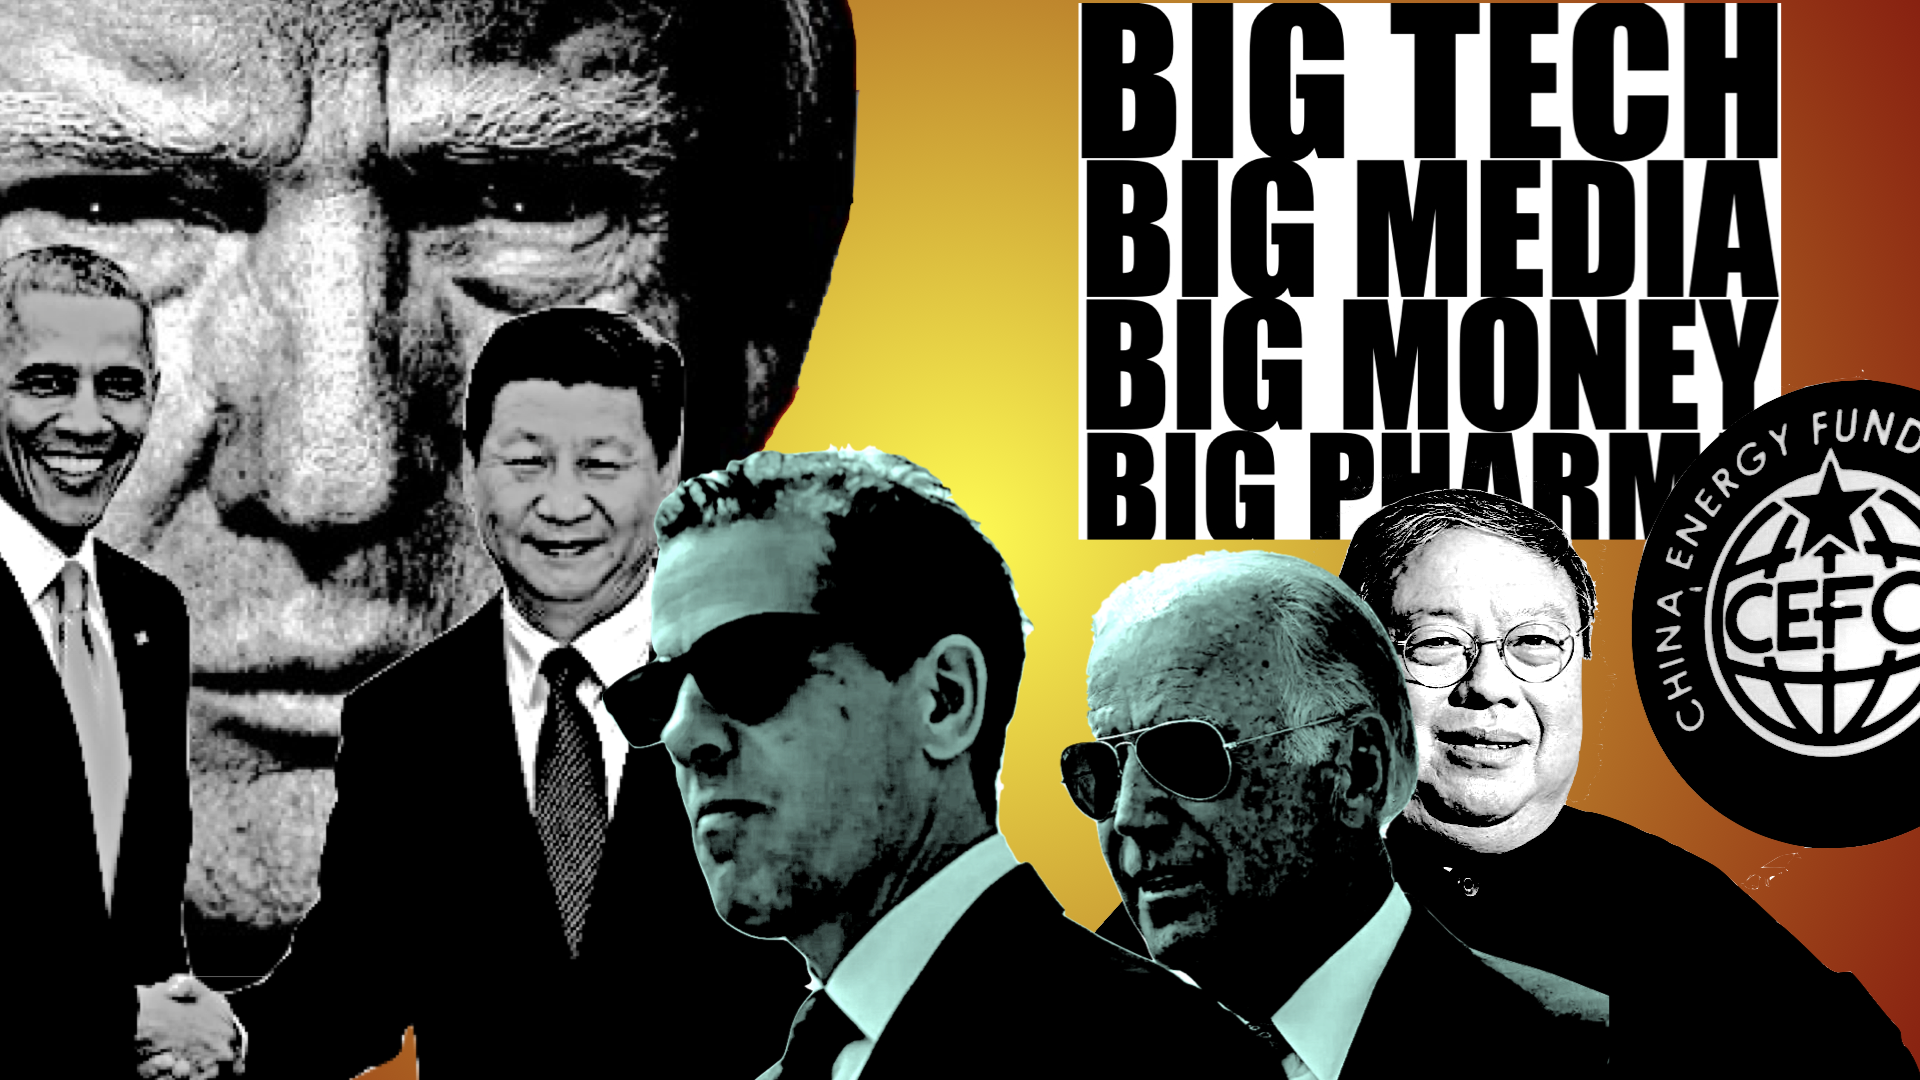 THE BIG PICTURE: New Evidence Informs and Confirms Old Analysis on Cover-up Operations, Biden Criminality, Ukraine, NATO, China and CEFC China Energy Company